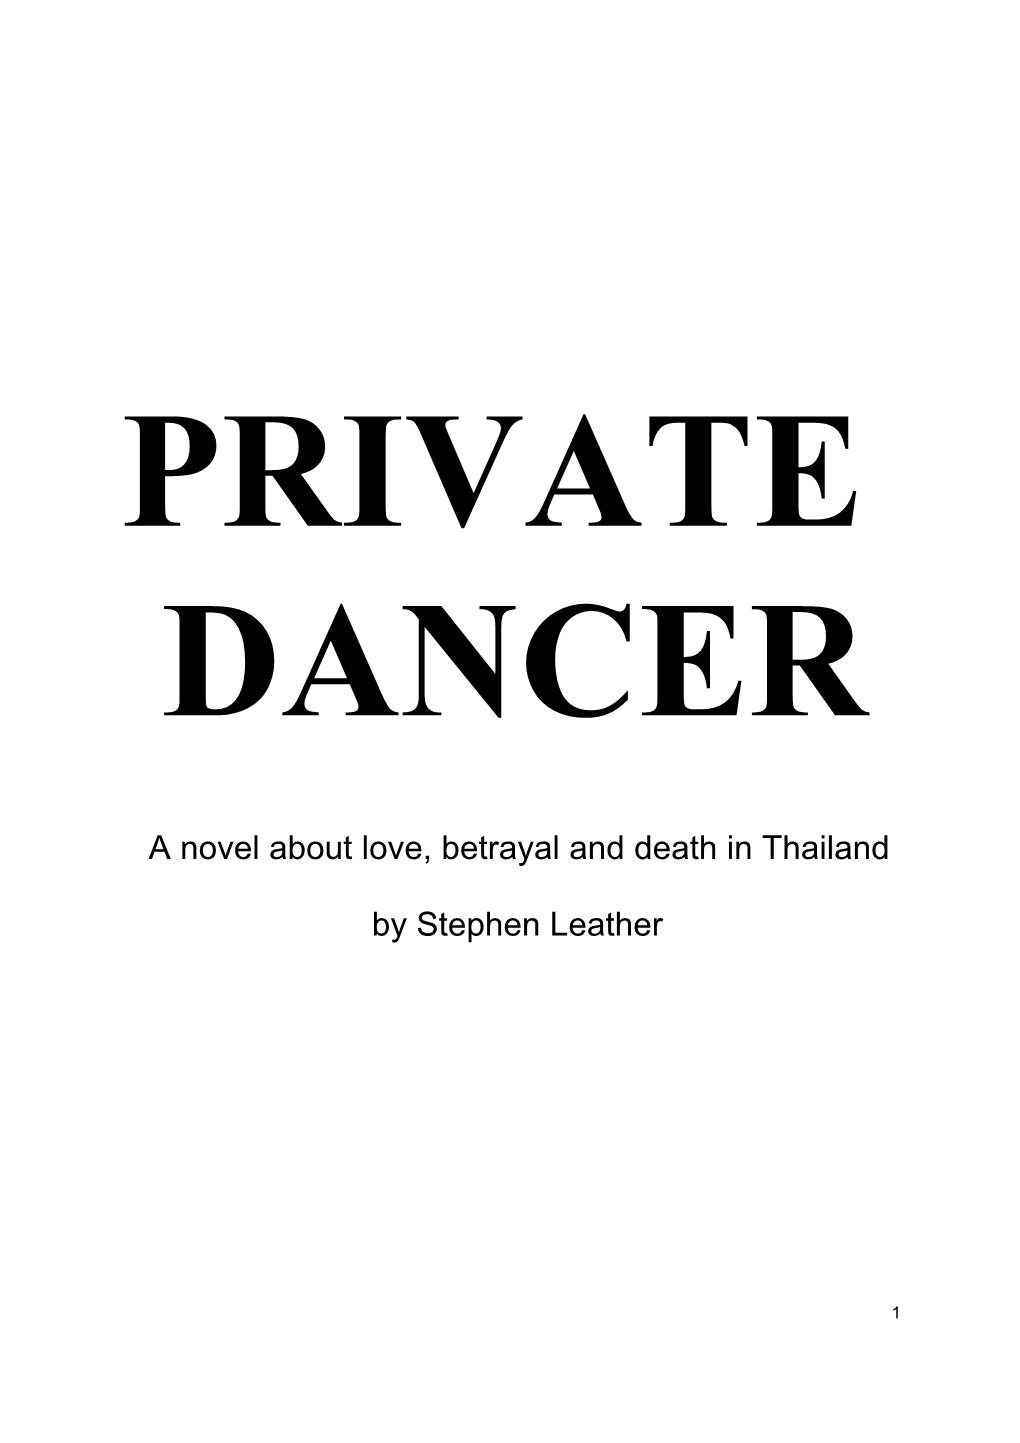 A Novel About Love, Betrayal and Death in Thailand by Stephen Leather